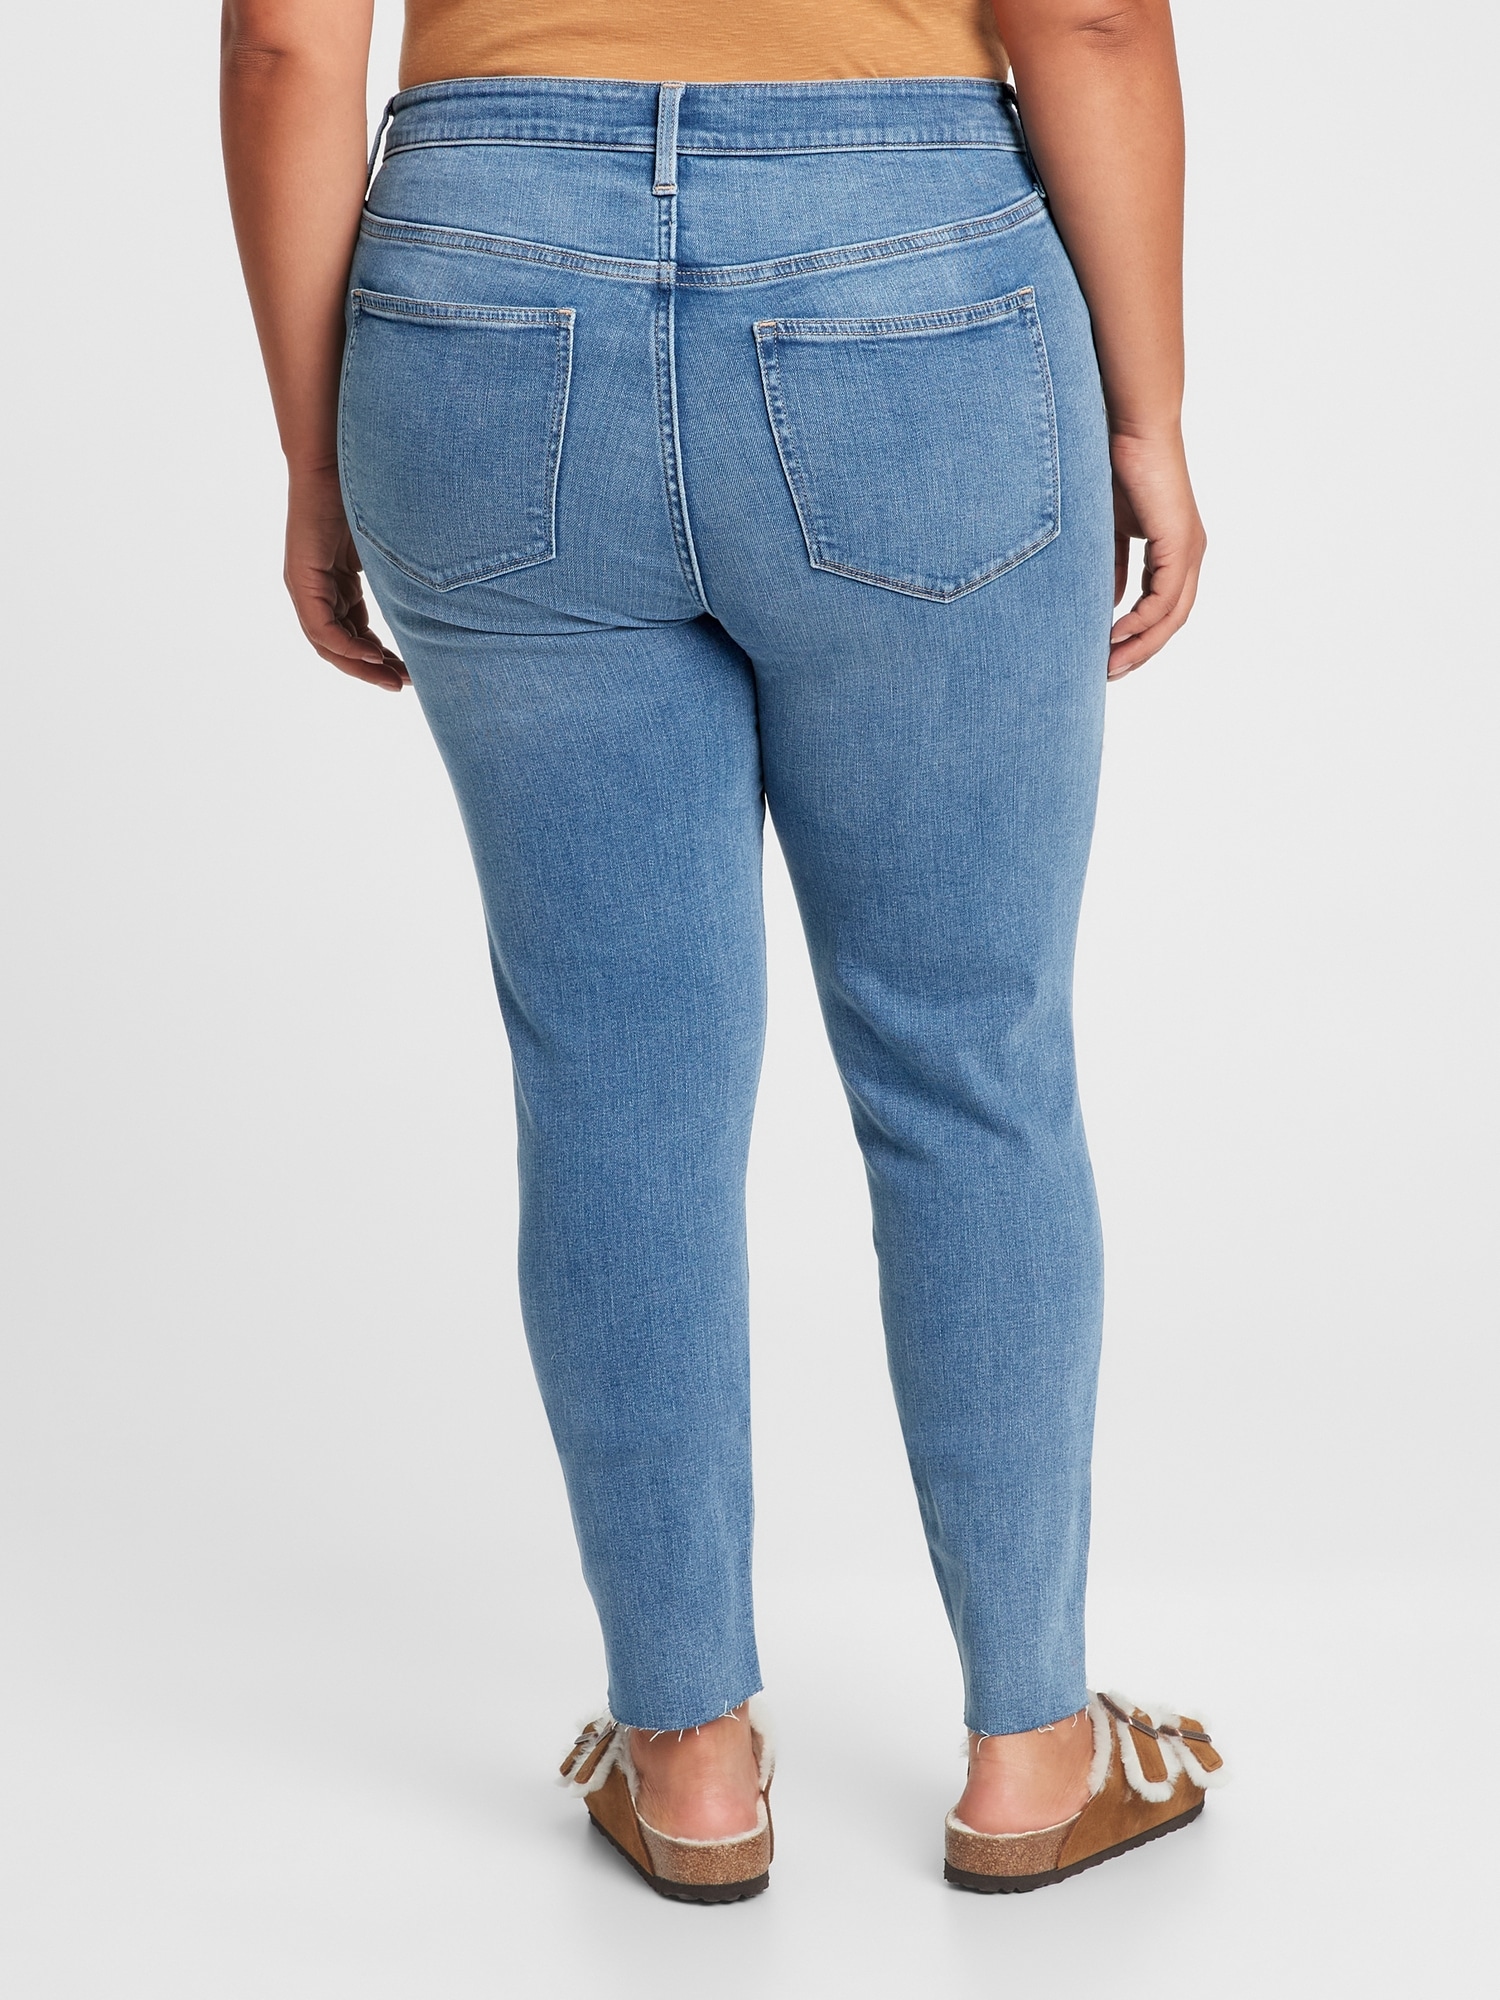 Buy Gap Black High Waisted Universal Legging Jeans from the Next UK online  shop